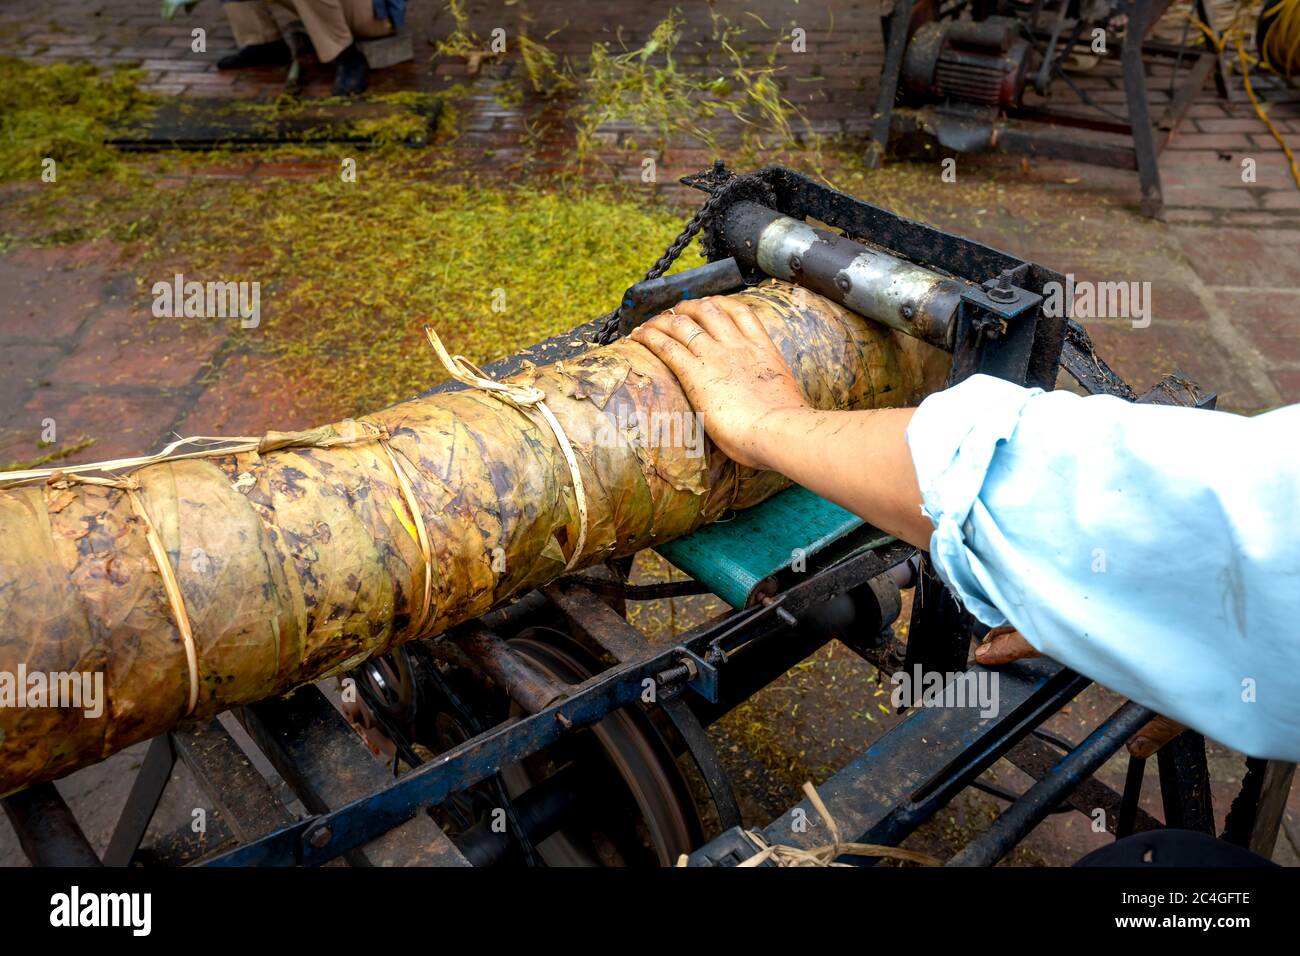 Thai Thuy District, Thai Binh Province, Vietnam - May 27, 2020: Village farmers doing manual work are: cutting and sorting cigarettes in Thai Thuy dis Stock Photo